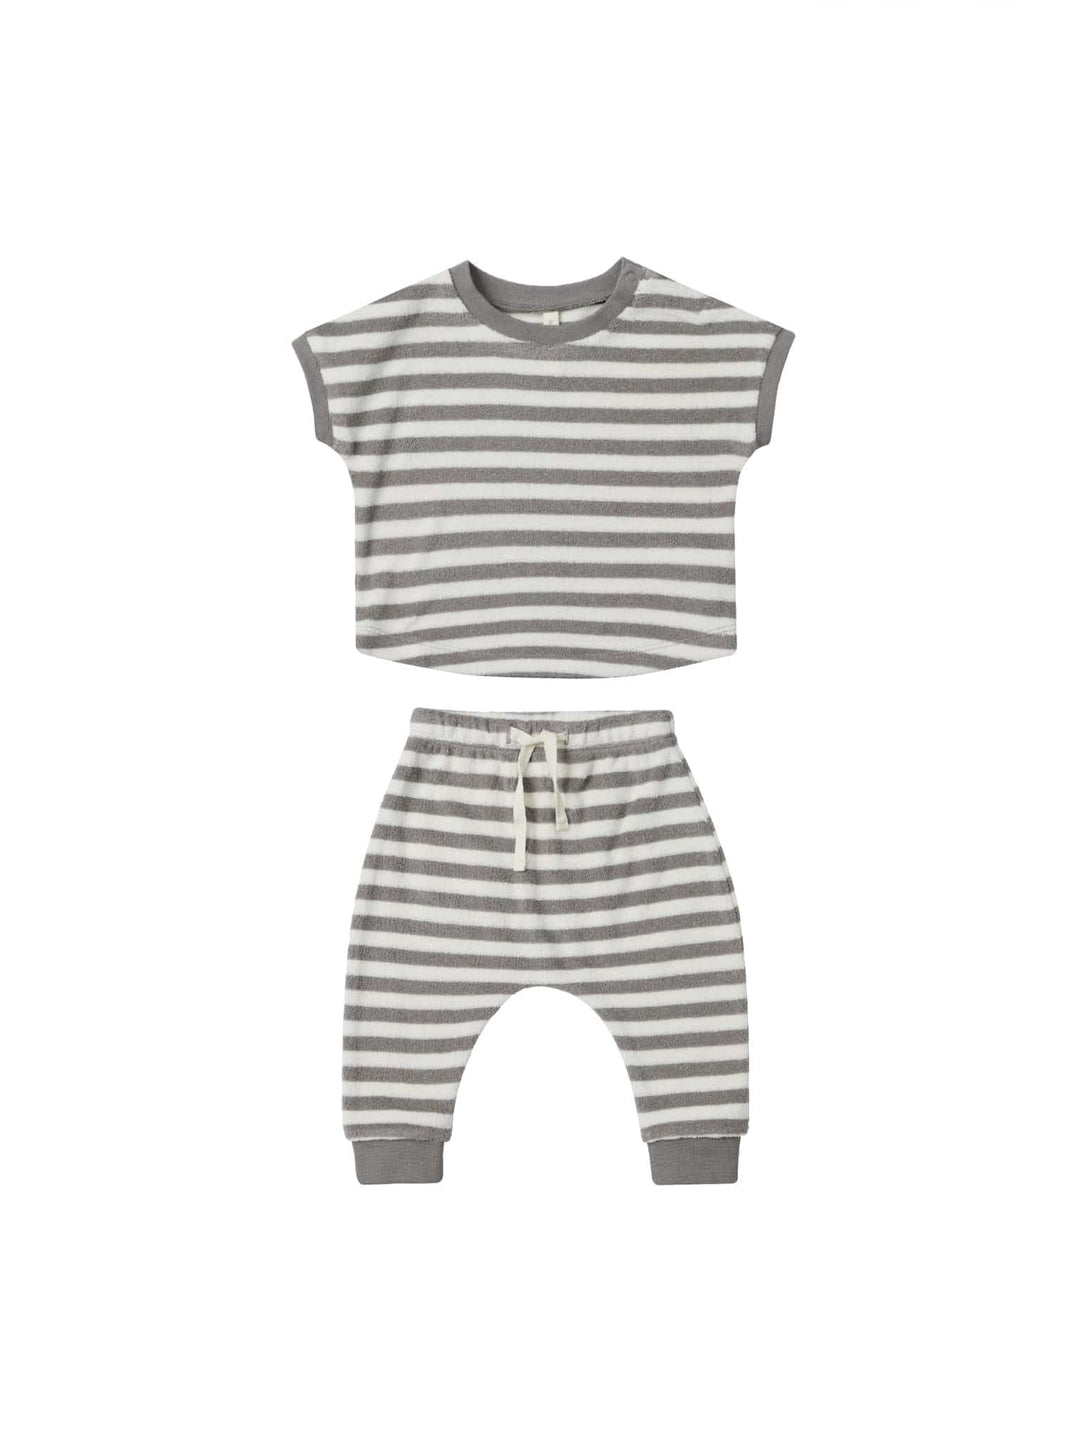 Quincy Mae 2-Piece Clothing Set 0-3m Terry Tee and Pant Set - Retro Stripe